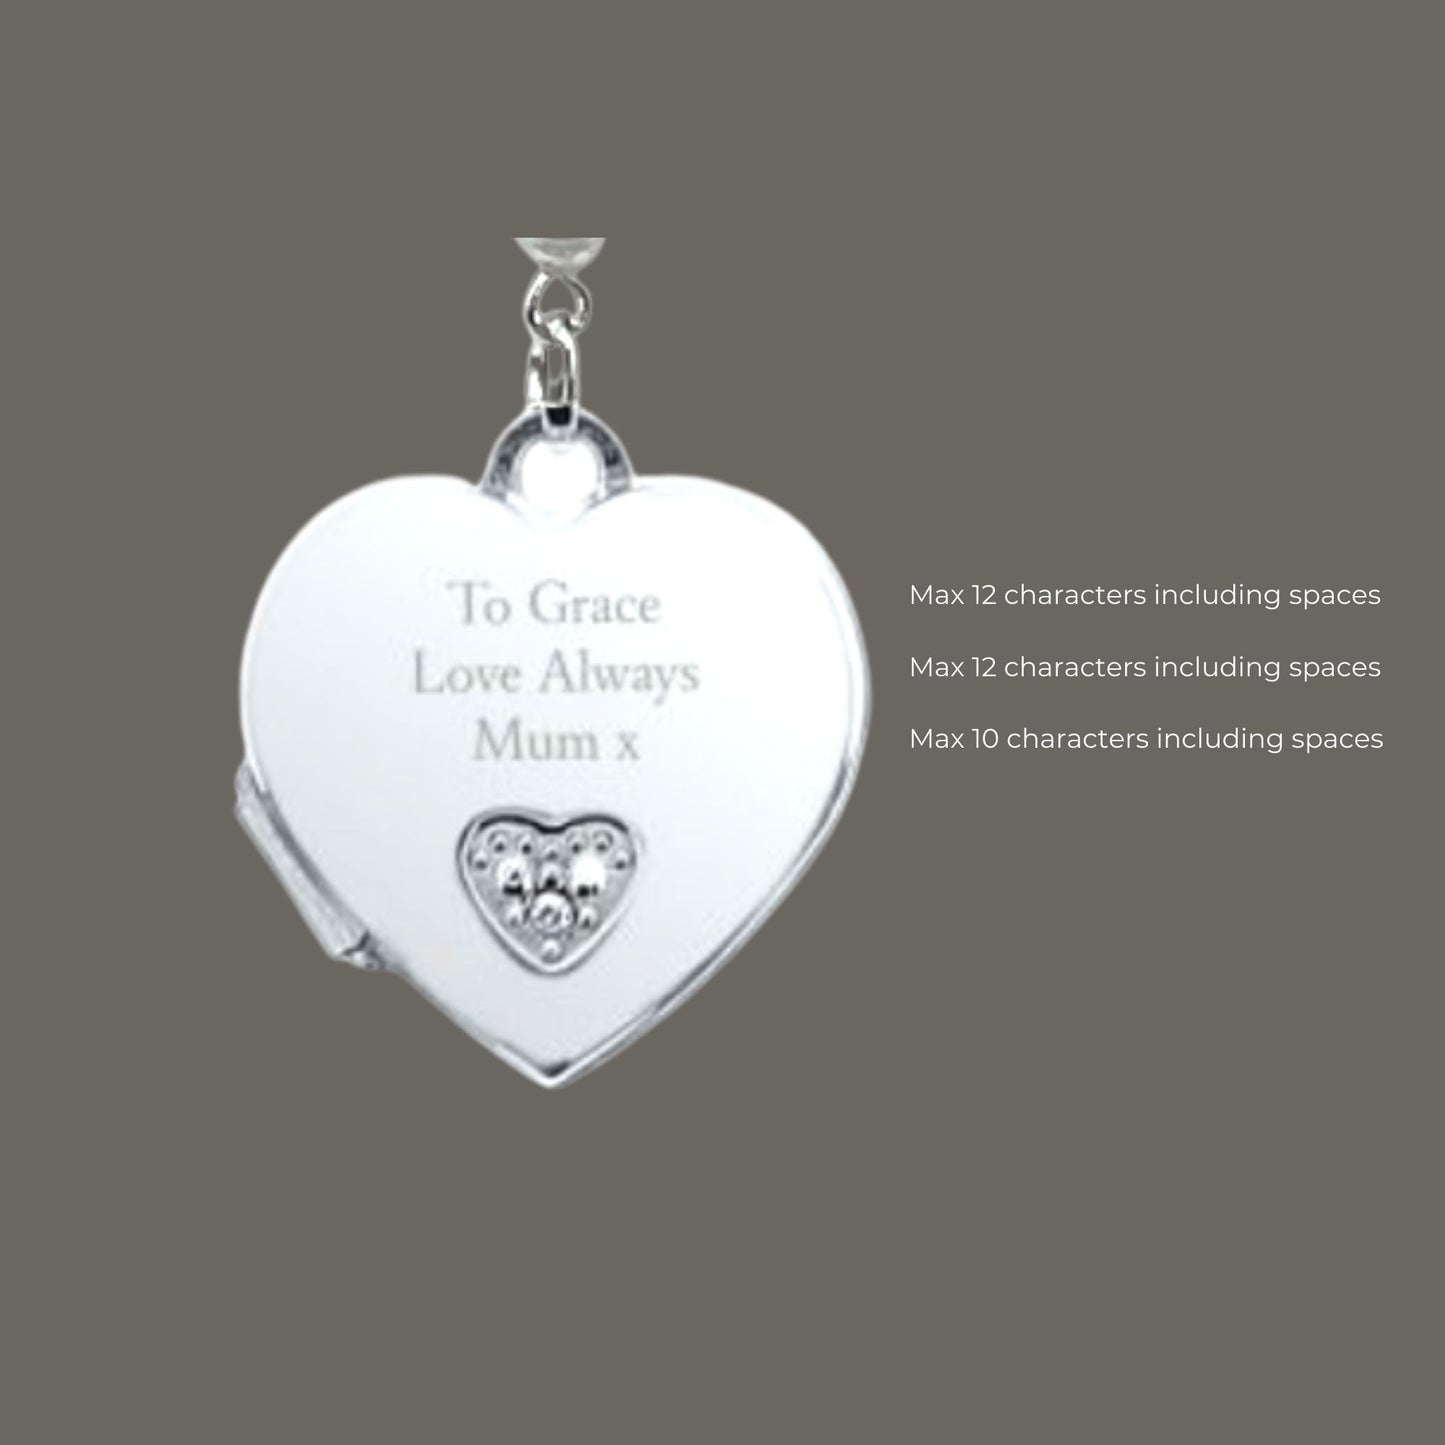 Close up of heart shaped opening locket with personalised engraving showing maximum characters per line.